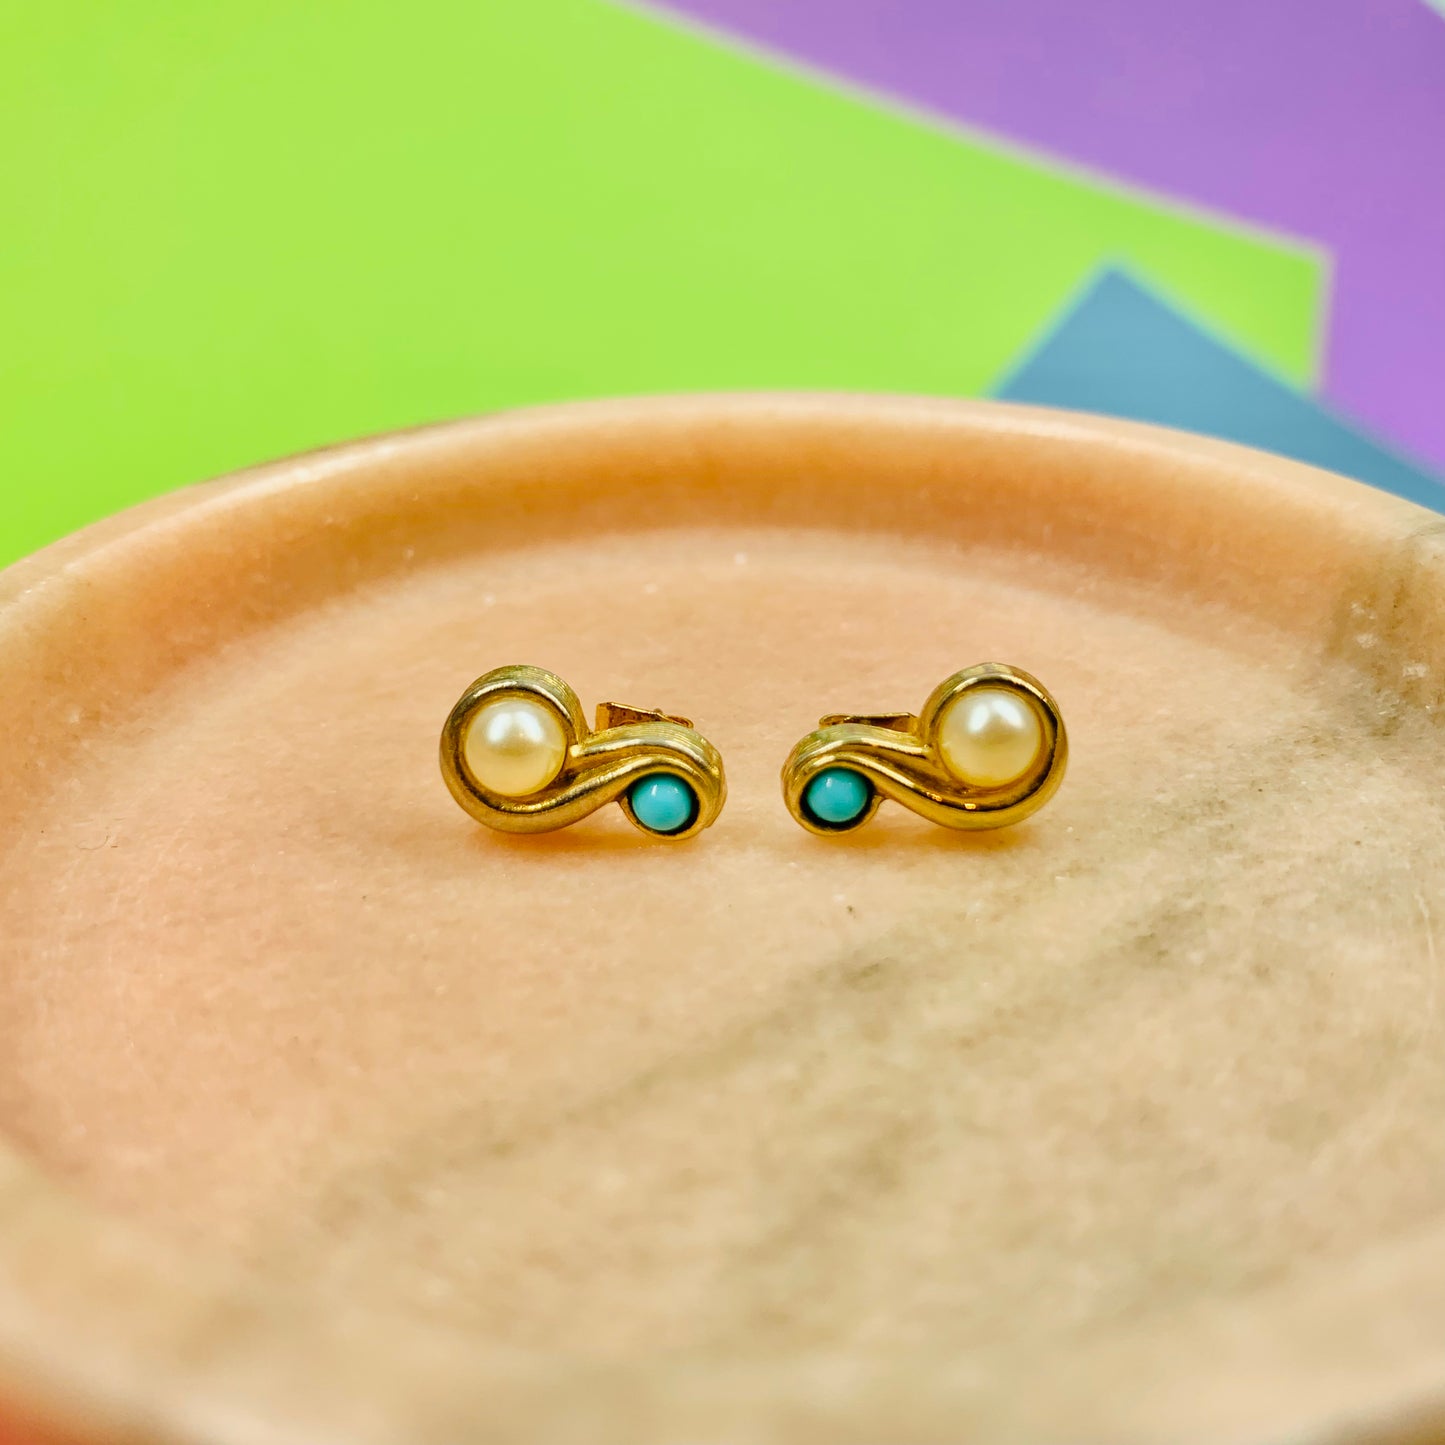 Rare 1970s Avon turquoise and pearl figure 8 stud earrings